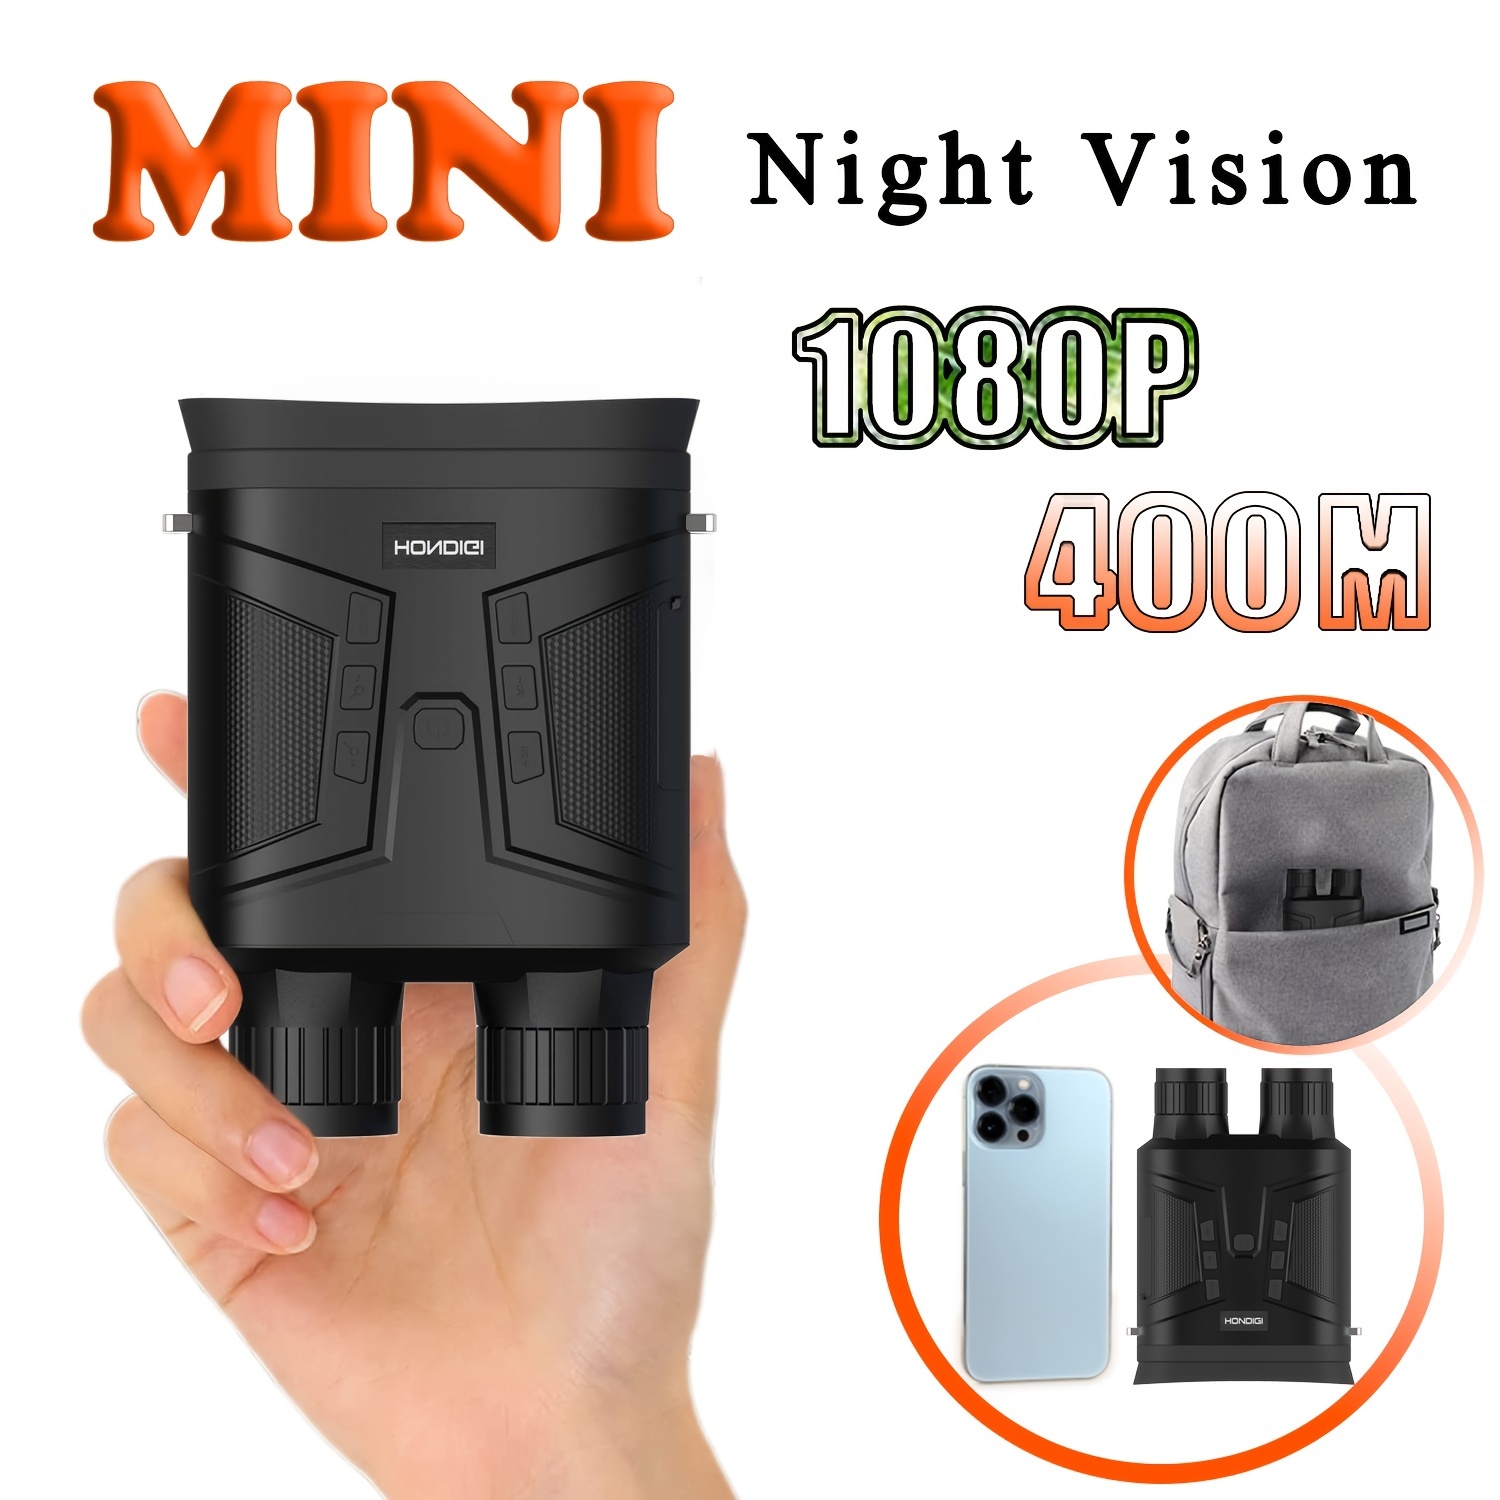 occer Night Vision Goggles - Infrared Binoculars Night Vision for Adults  Kids Hunter with 32GB Card, 3 Mode Night Vision Sensitivity - Digital Night  Vision Scopes Military for Hunting,Camping,Wildlife 